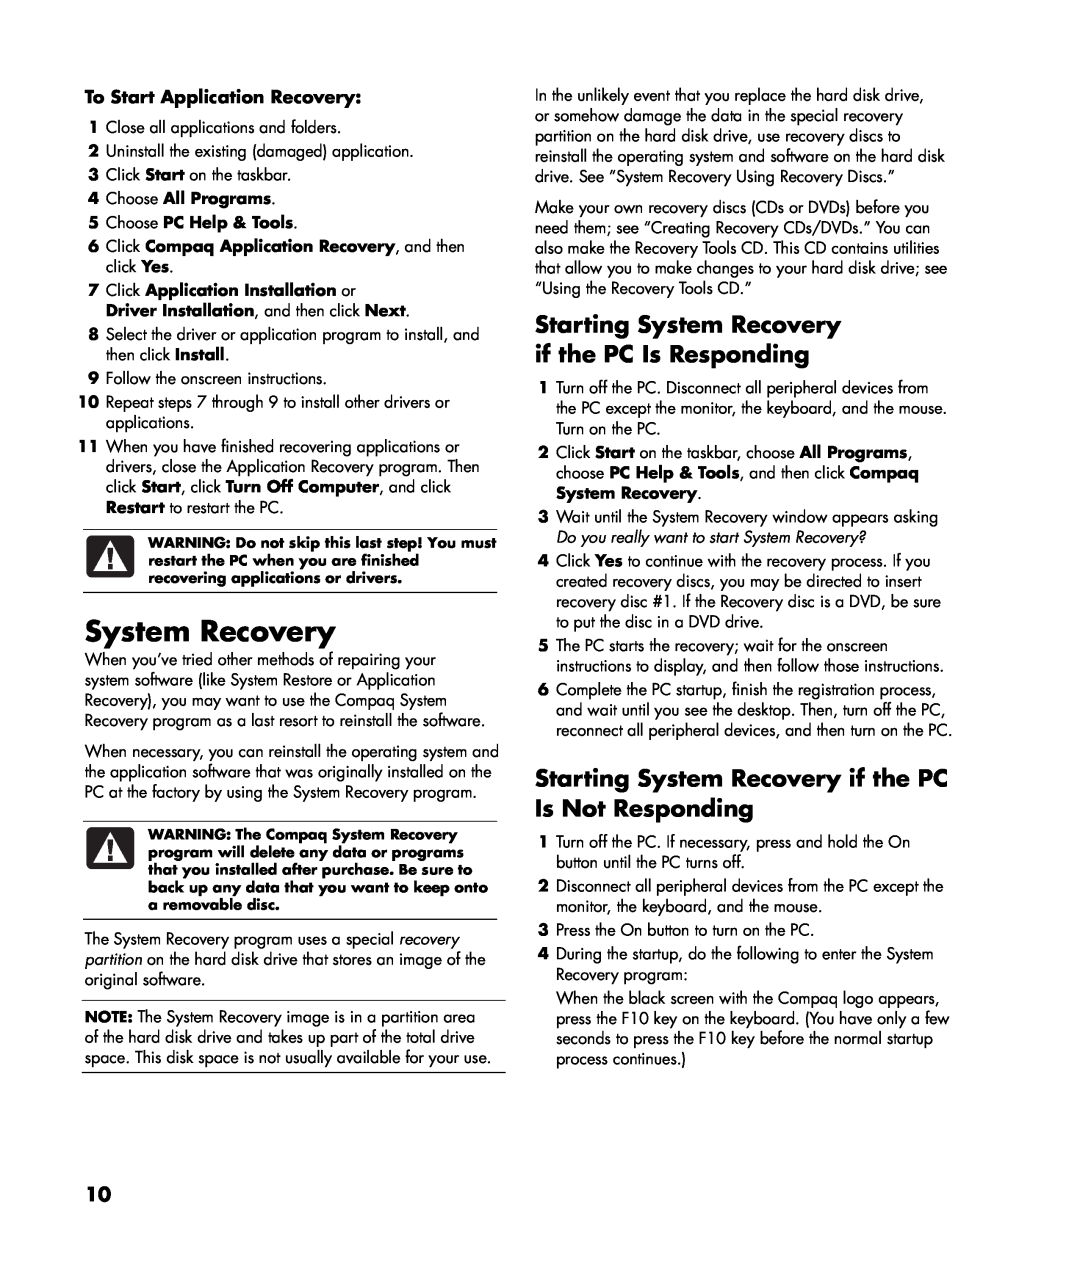 HP SR1126NX Starting System Recovery if the PC Is Responding, Starting System Recovery if the PC Is Not Responding 